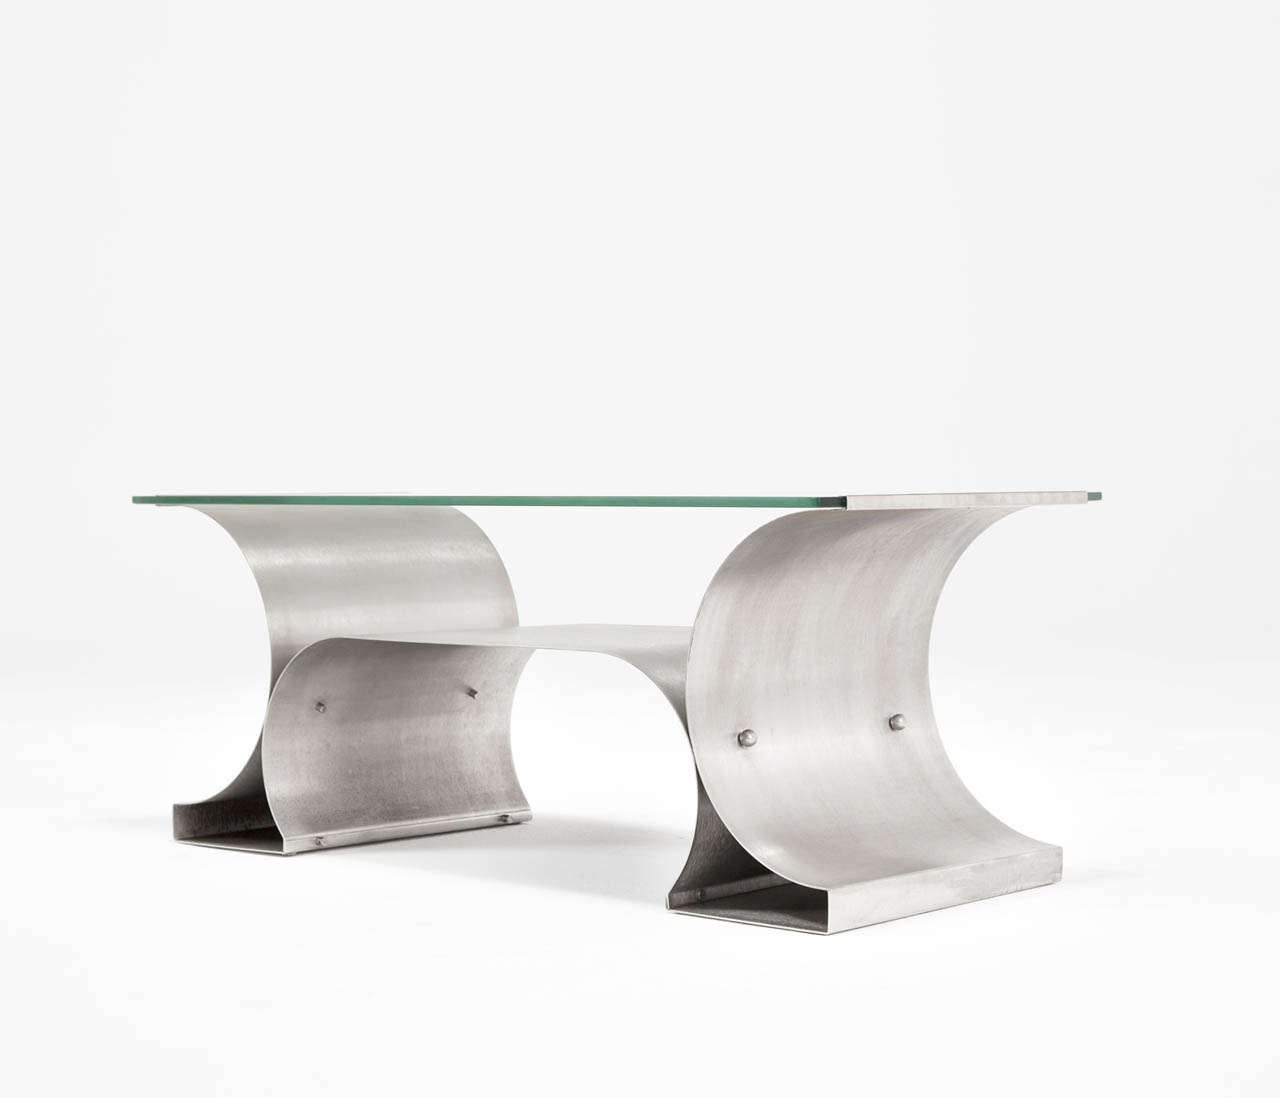 Cocktail table, in stainless steel and glass by Michel Boyer, France, circa 1968.

A stainless steel and glass 'X' series coffee table by Michel Boyer. Parisian designer Michel Boyer is at the forefront of “Modern Classic” design. 
He won renown